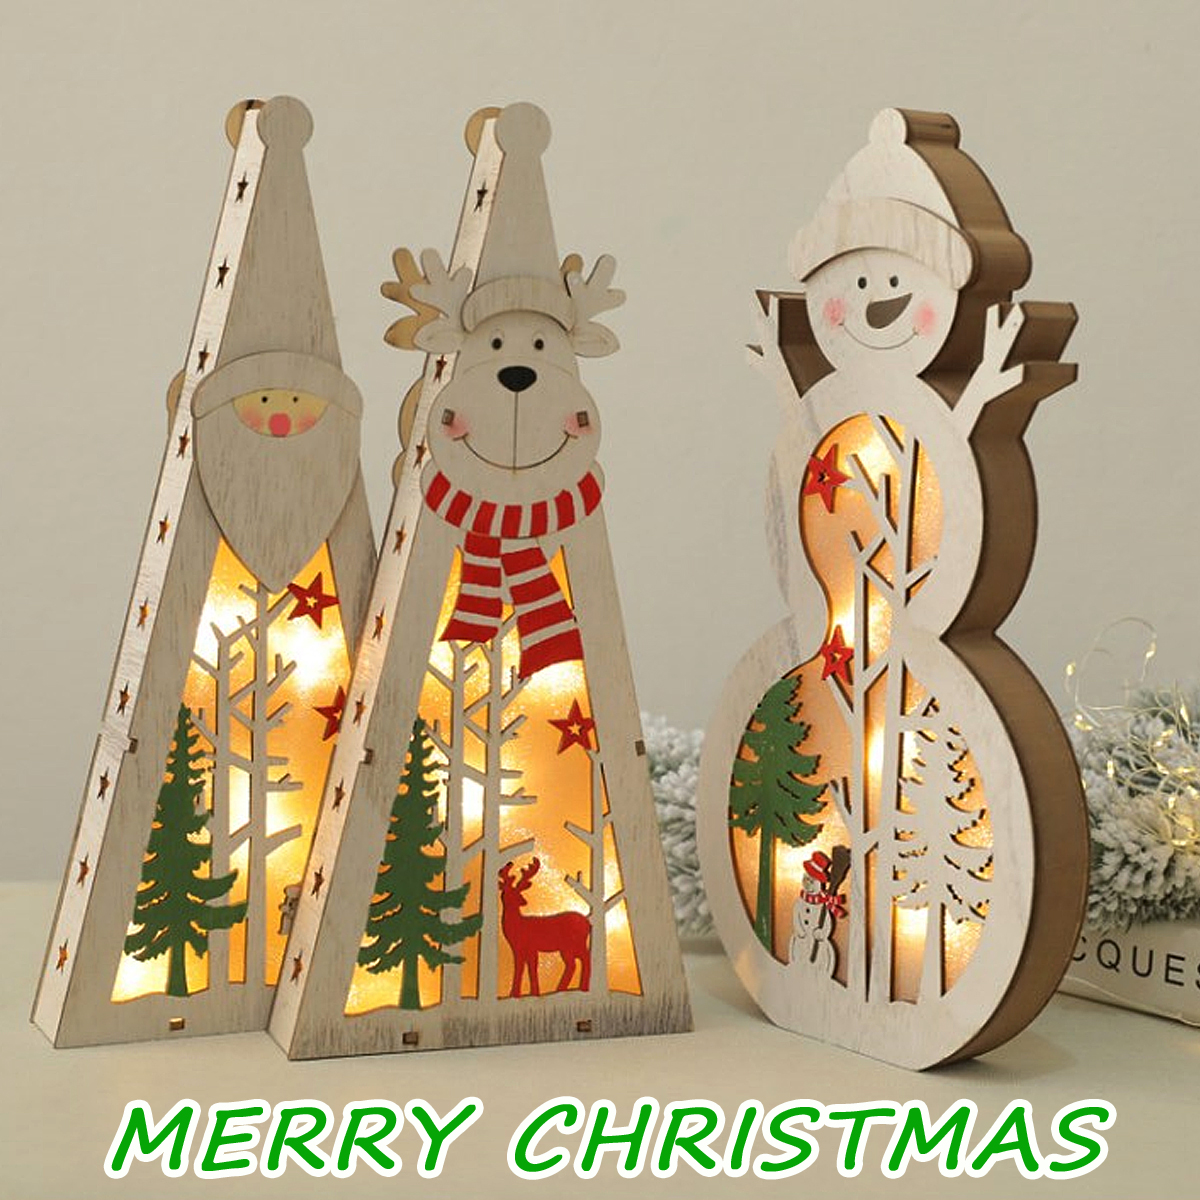 Festival-Wooden-LED-Christmas-Light-Display-Ornament-for-Christmas-Home-Table-Decorations-1403835-1